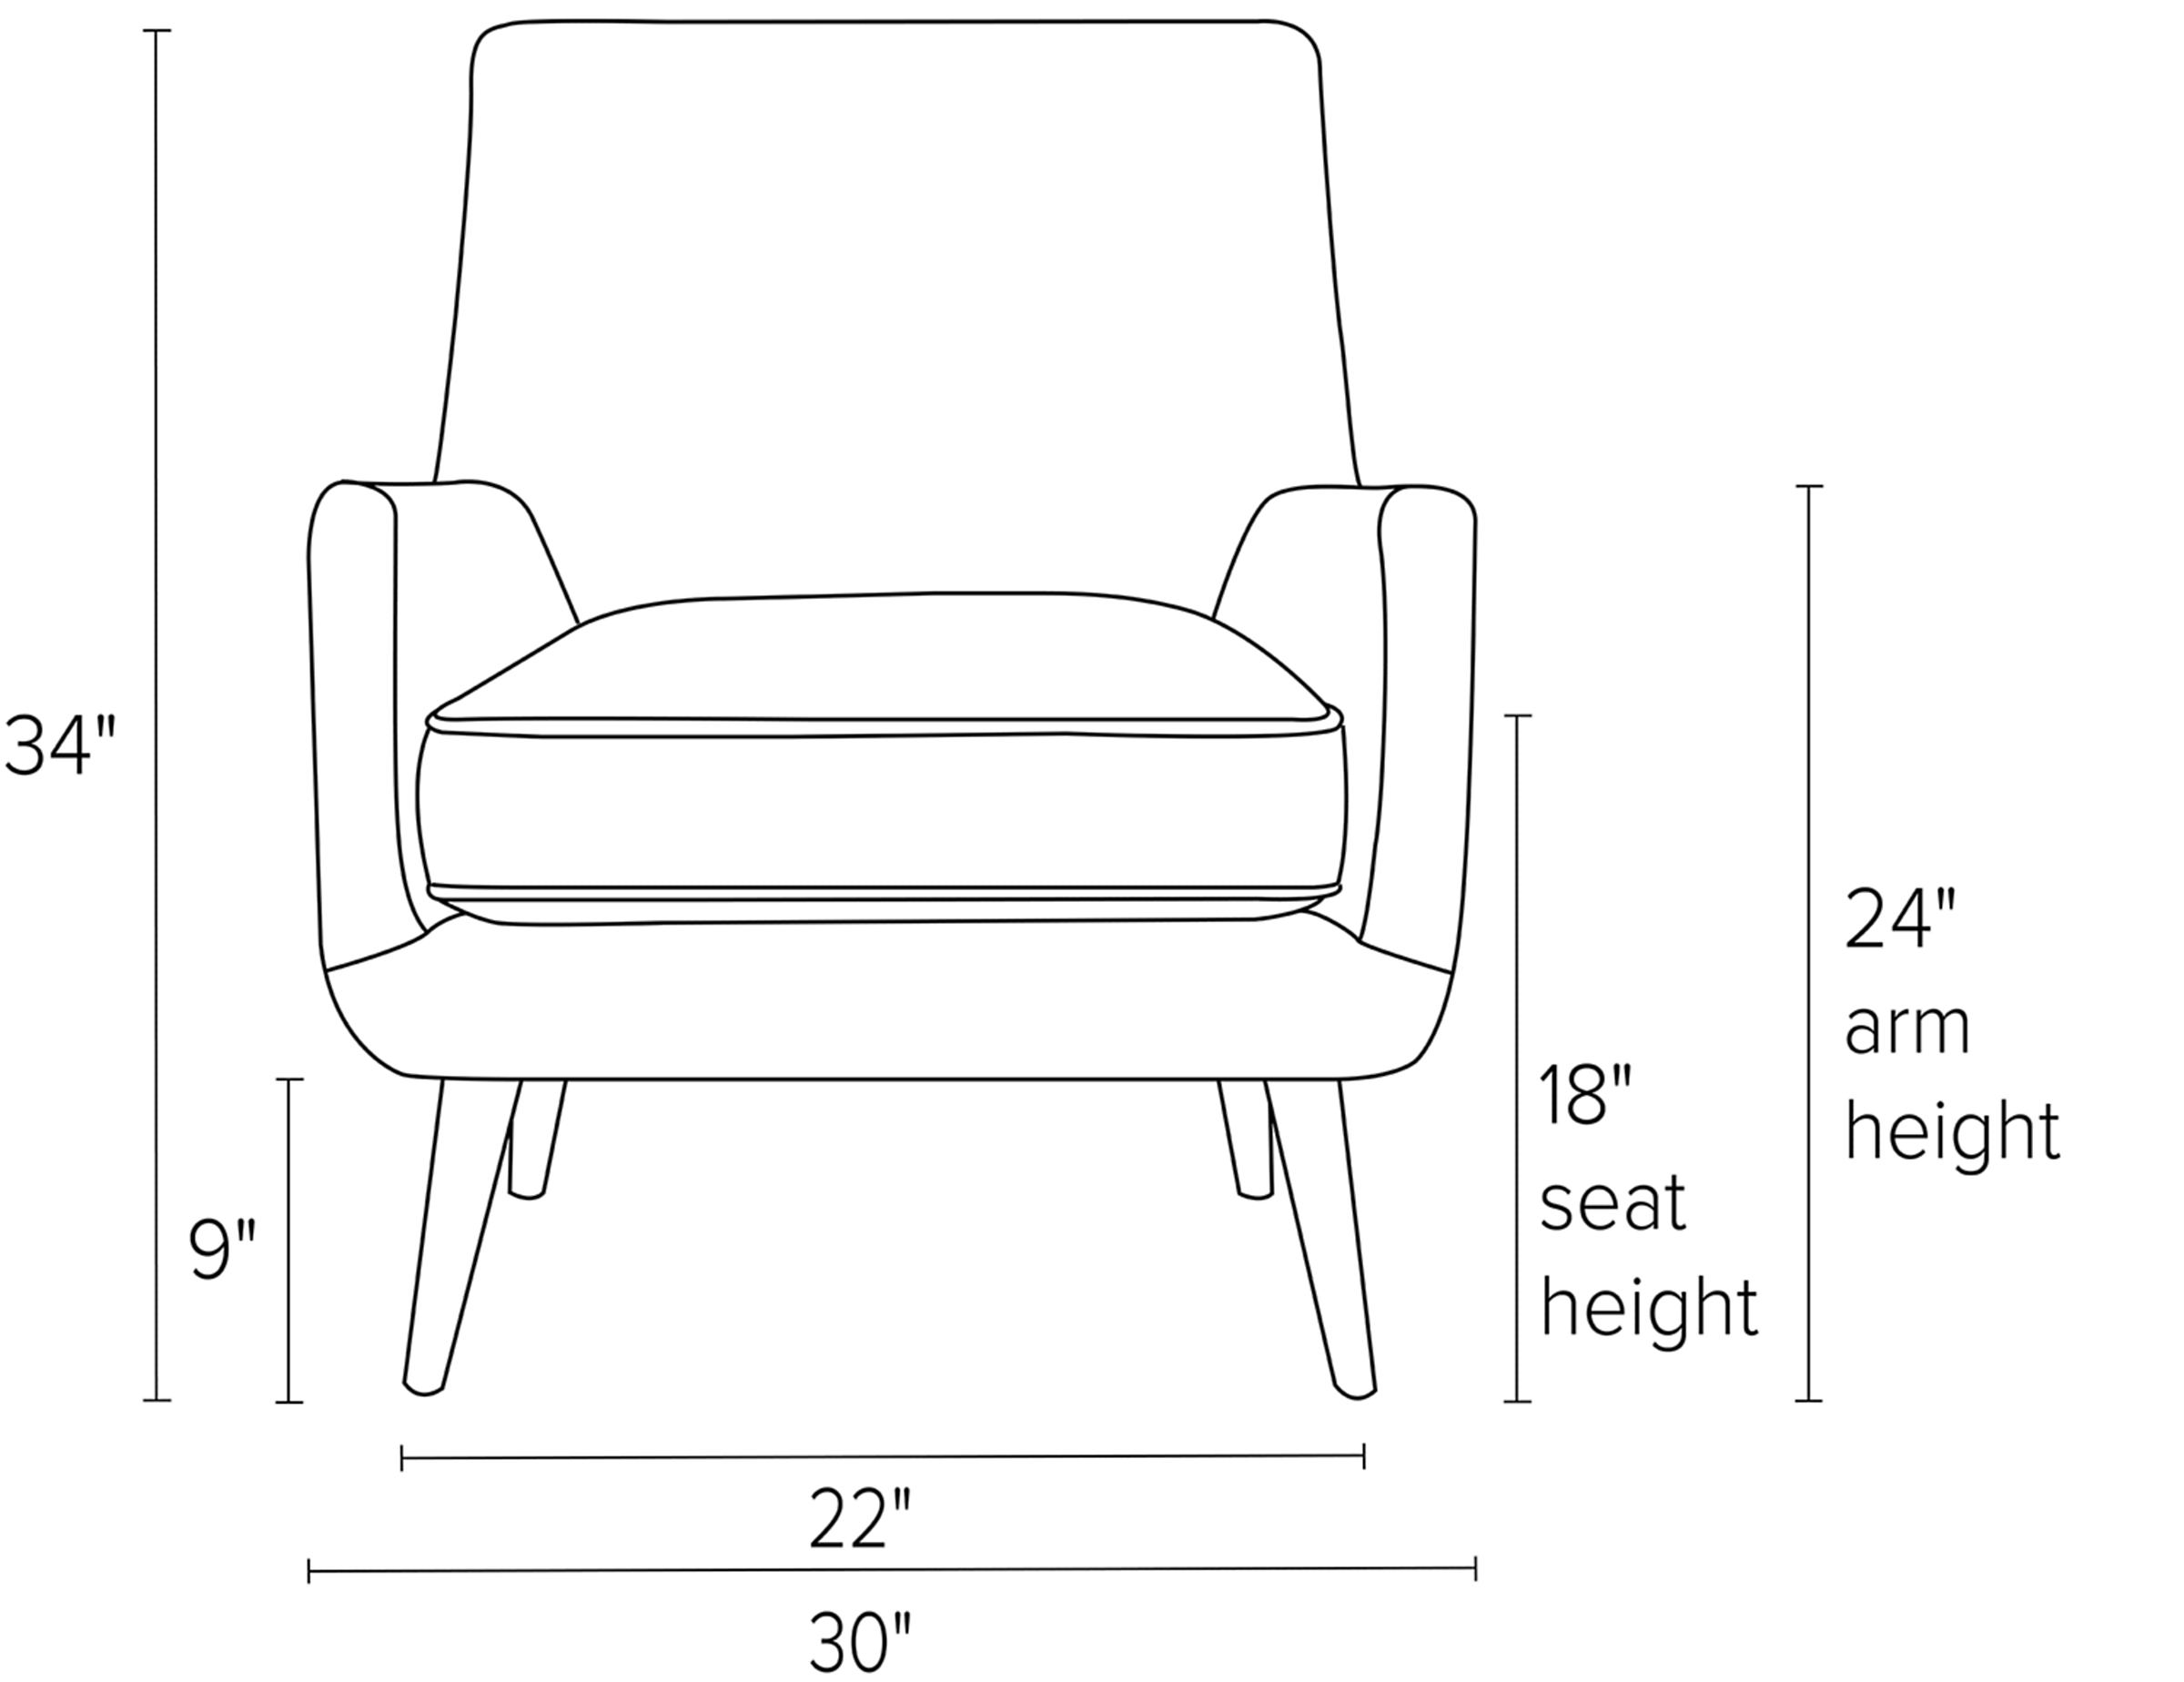 Front view dimension illustration of Quinn chair.